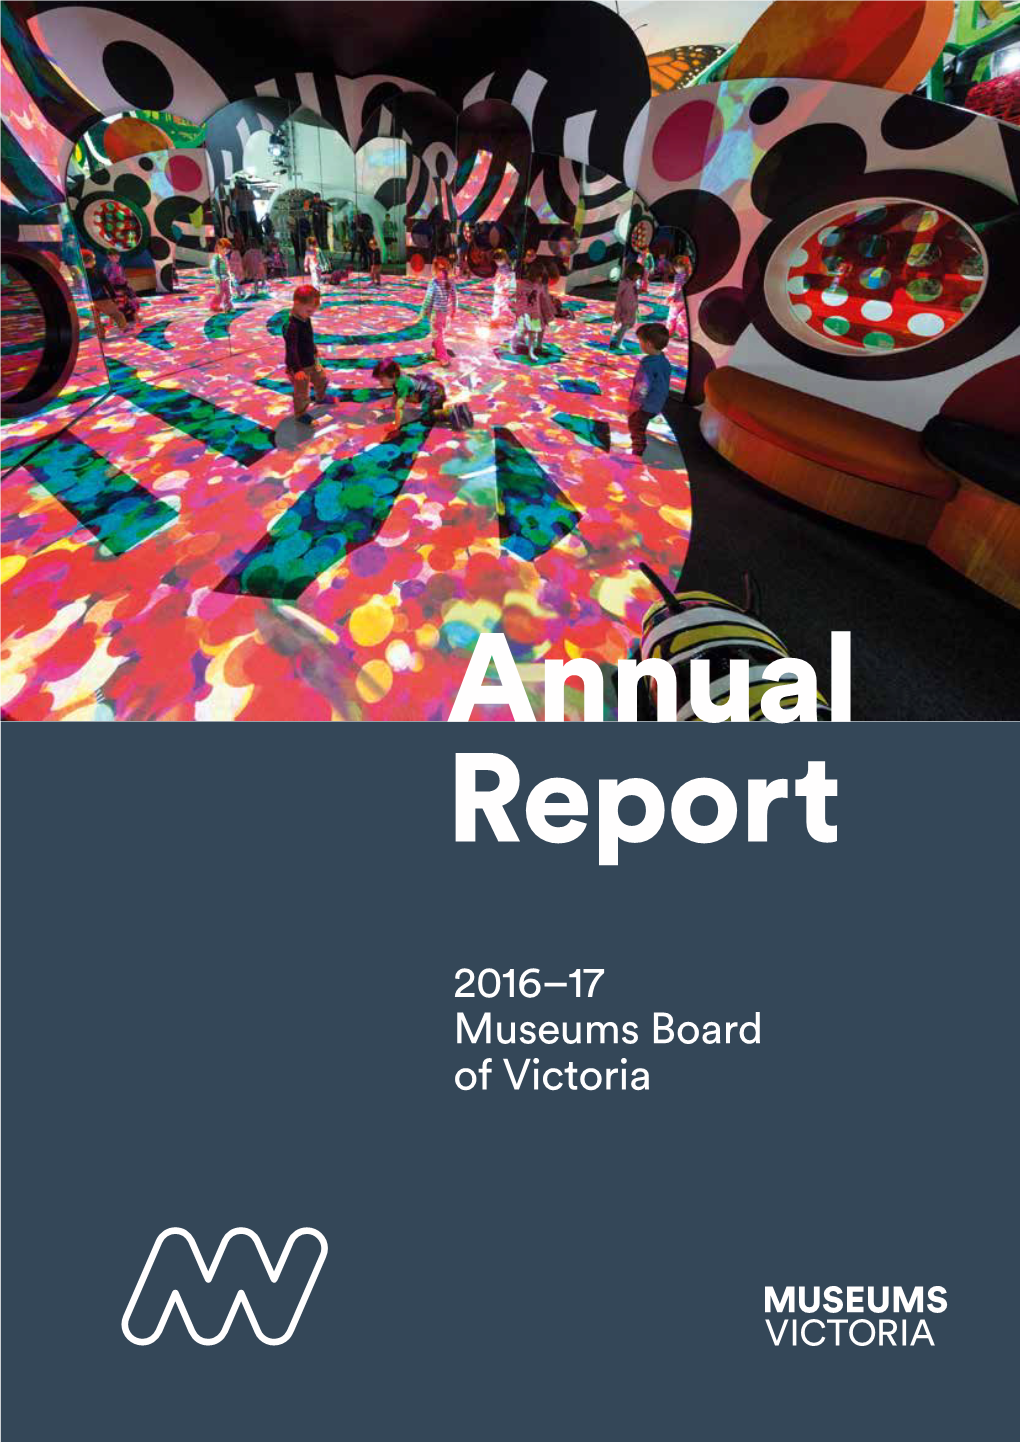 Annual Report 2016-17 Museums Board of Victoria